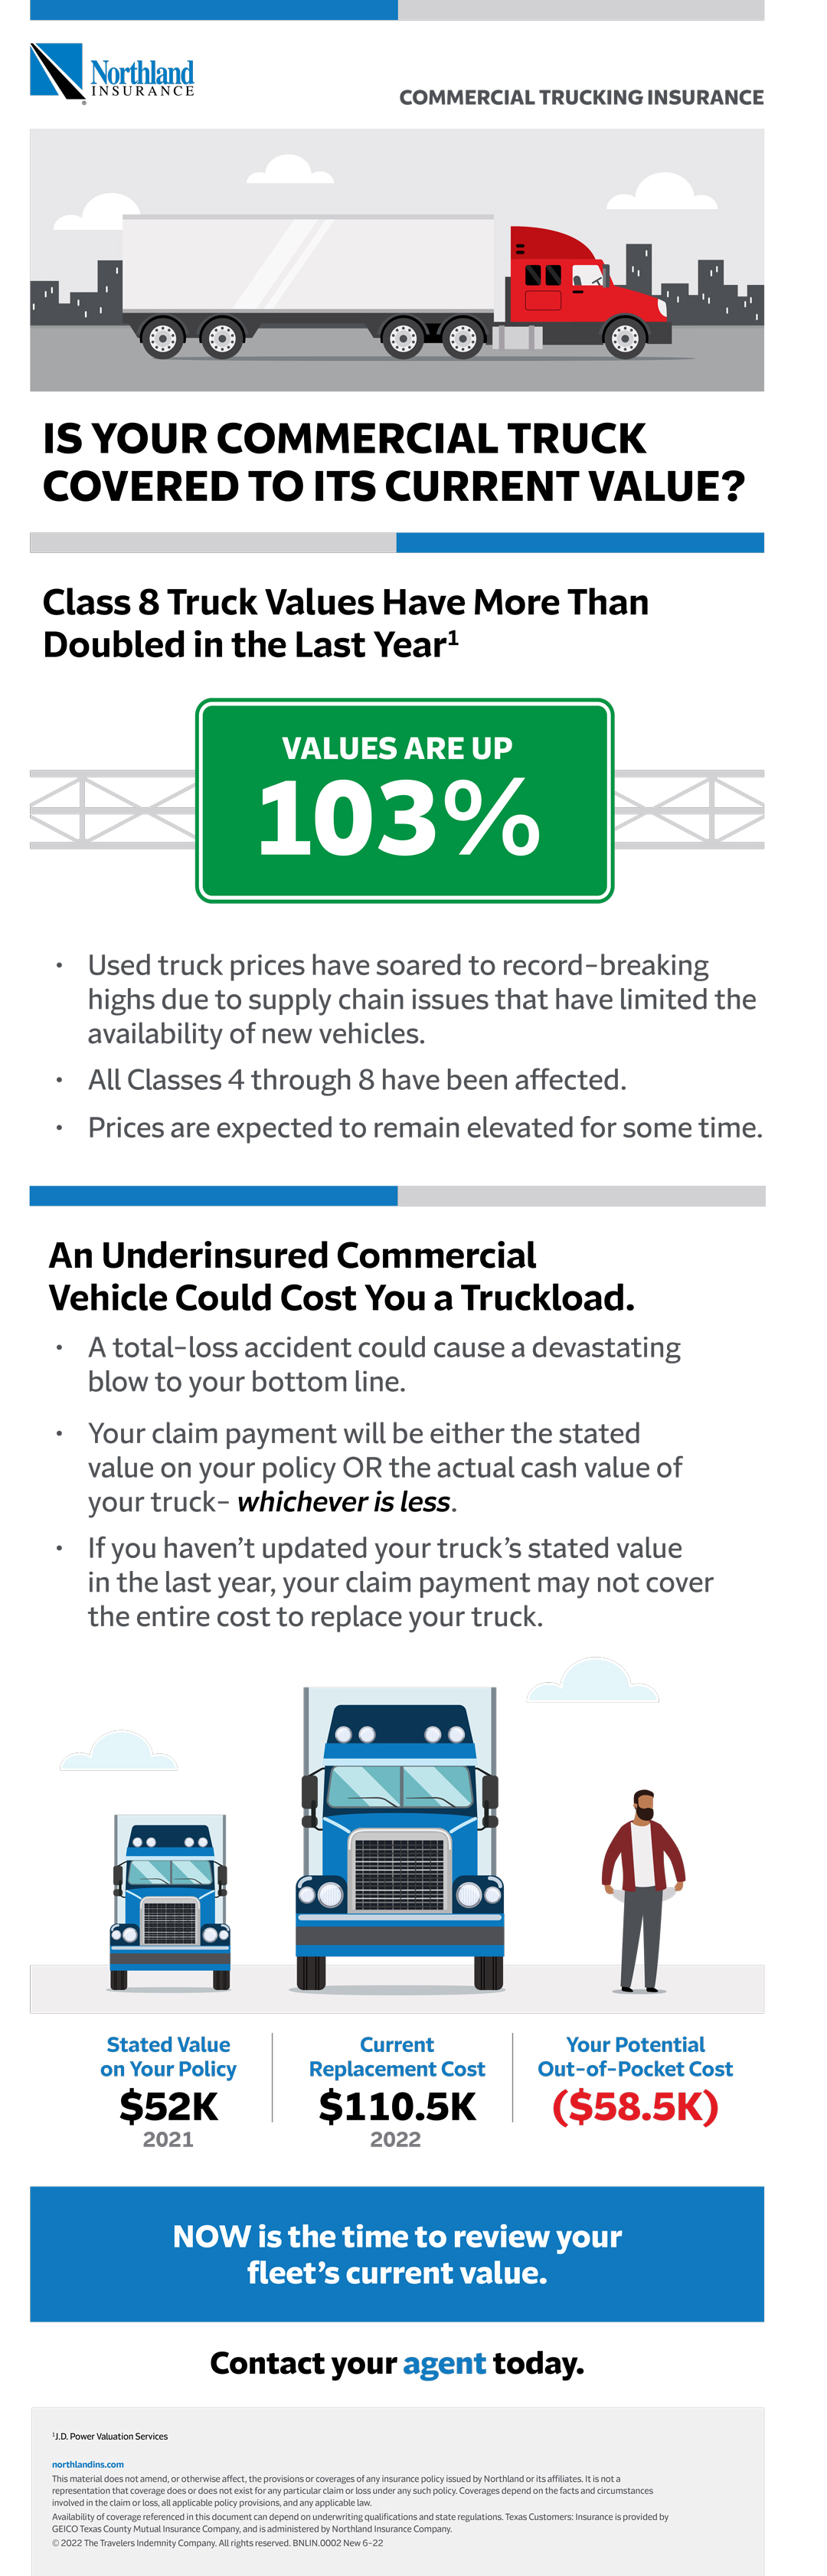 Why You Need to Insure Your Commercial Truck to Its Current Value